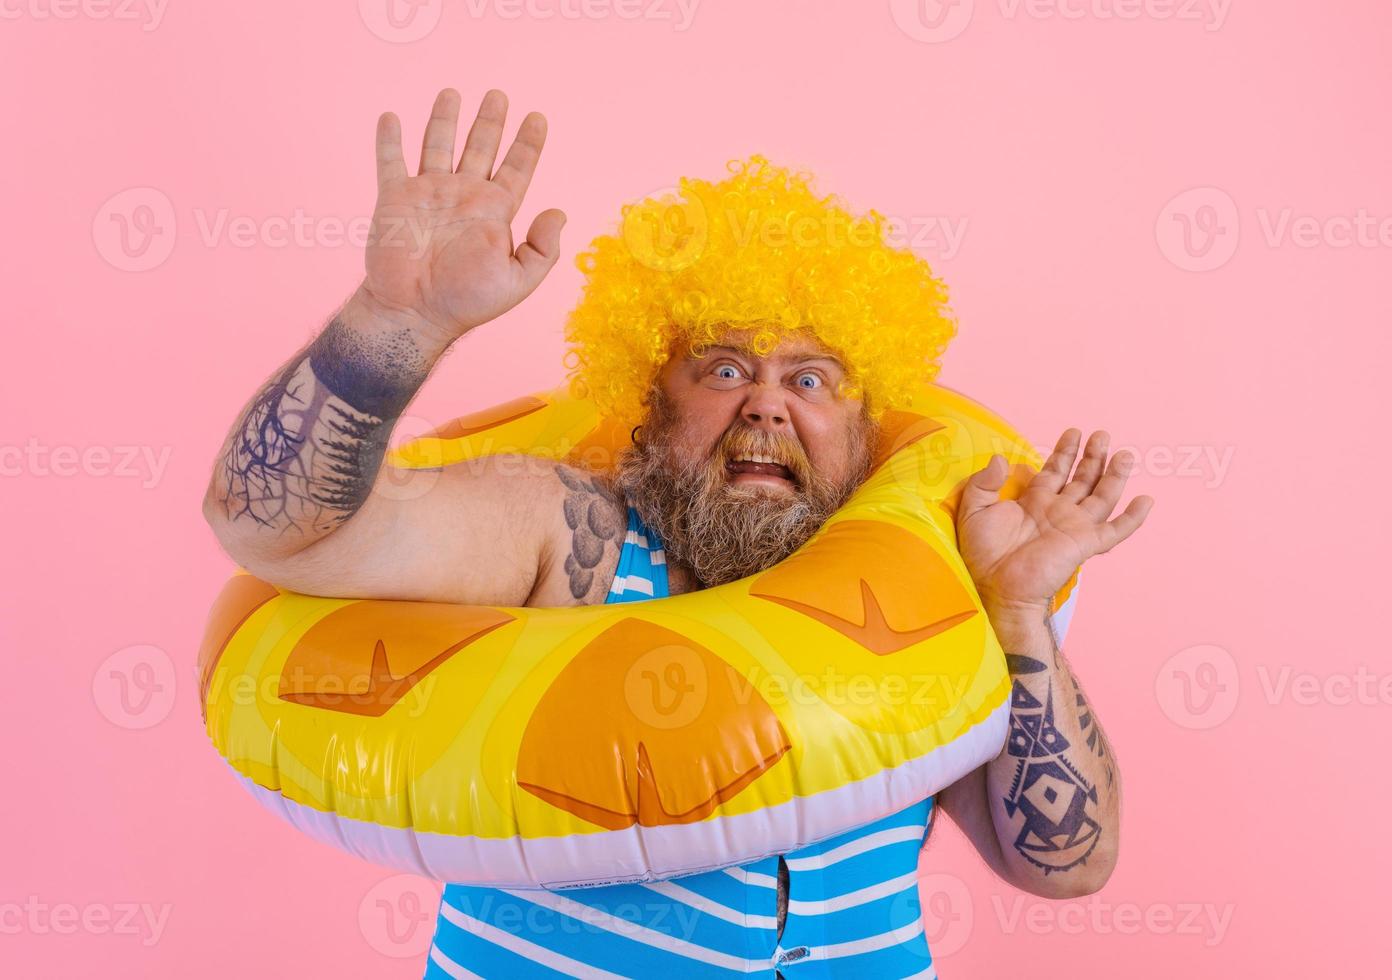 Fat afraid man with wig in head is ready to swim with a donut lifesaver photo